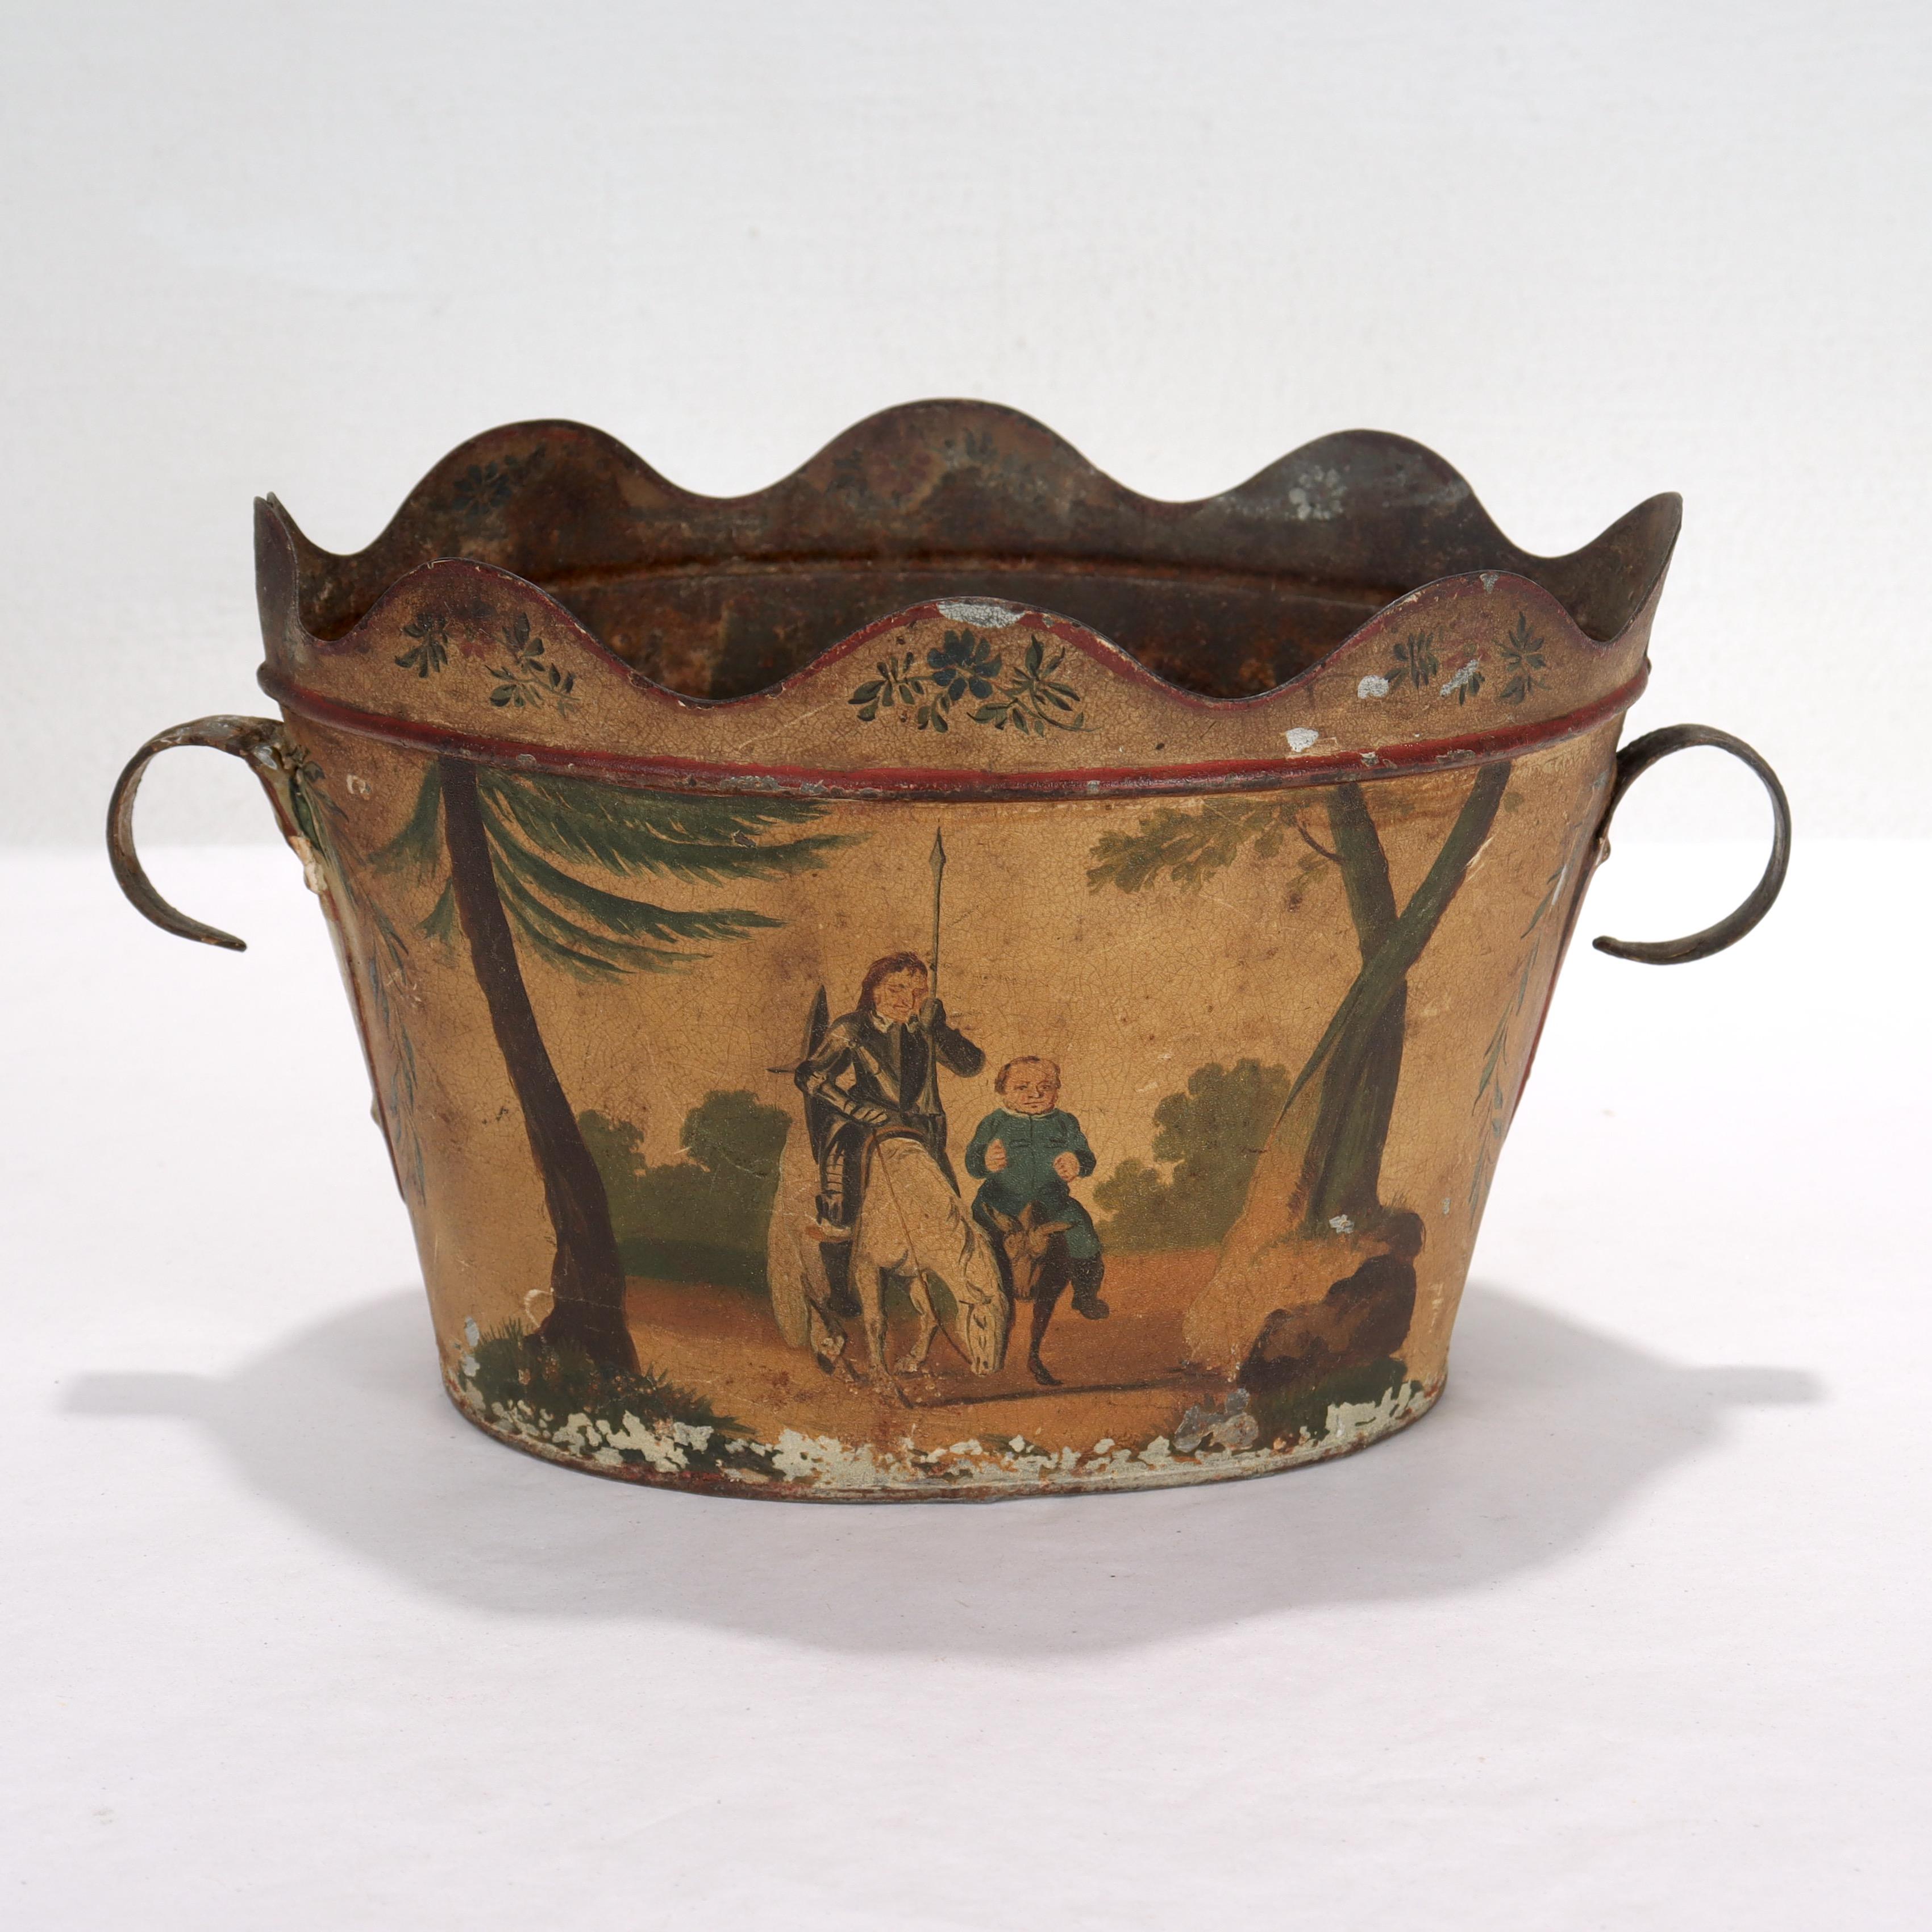 A fine antique Toleware cachepot or planter.

Decorated to both sides with a scene of Don Quixote and his companion Sancho riding atop a horse and donkey respectively

With two small curved handles, one of which appears to have been repaired.